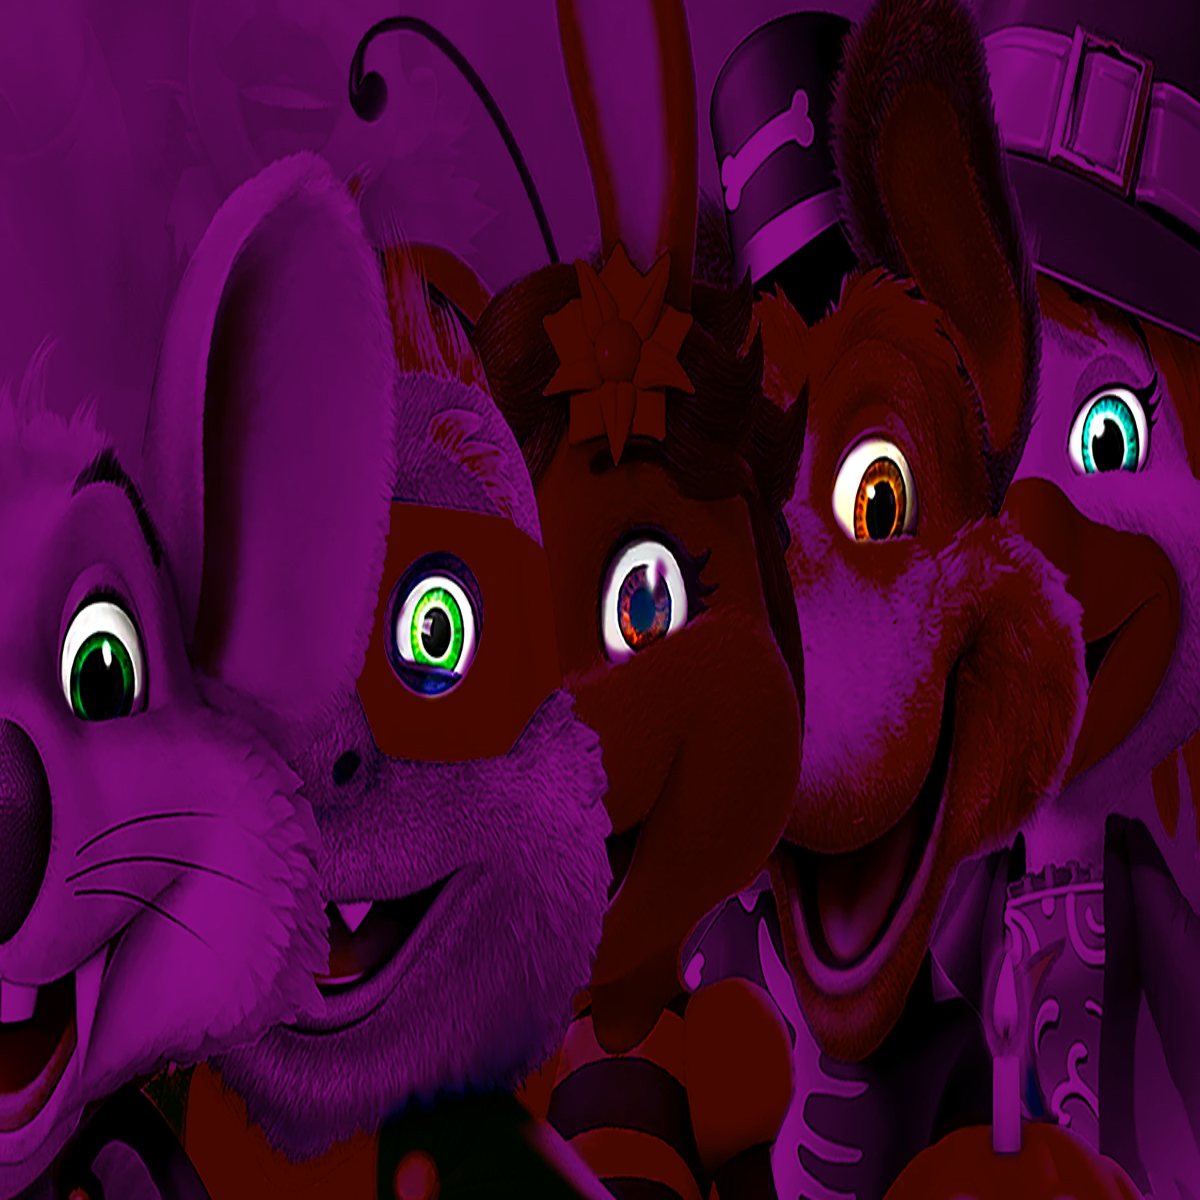 Five Nights at Freddy's is looking like this year's big Halloween